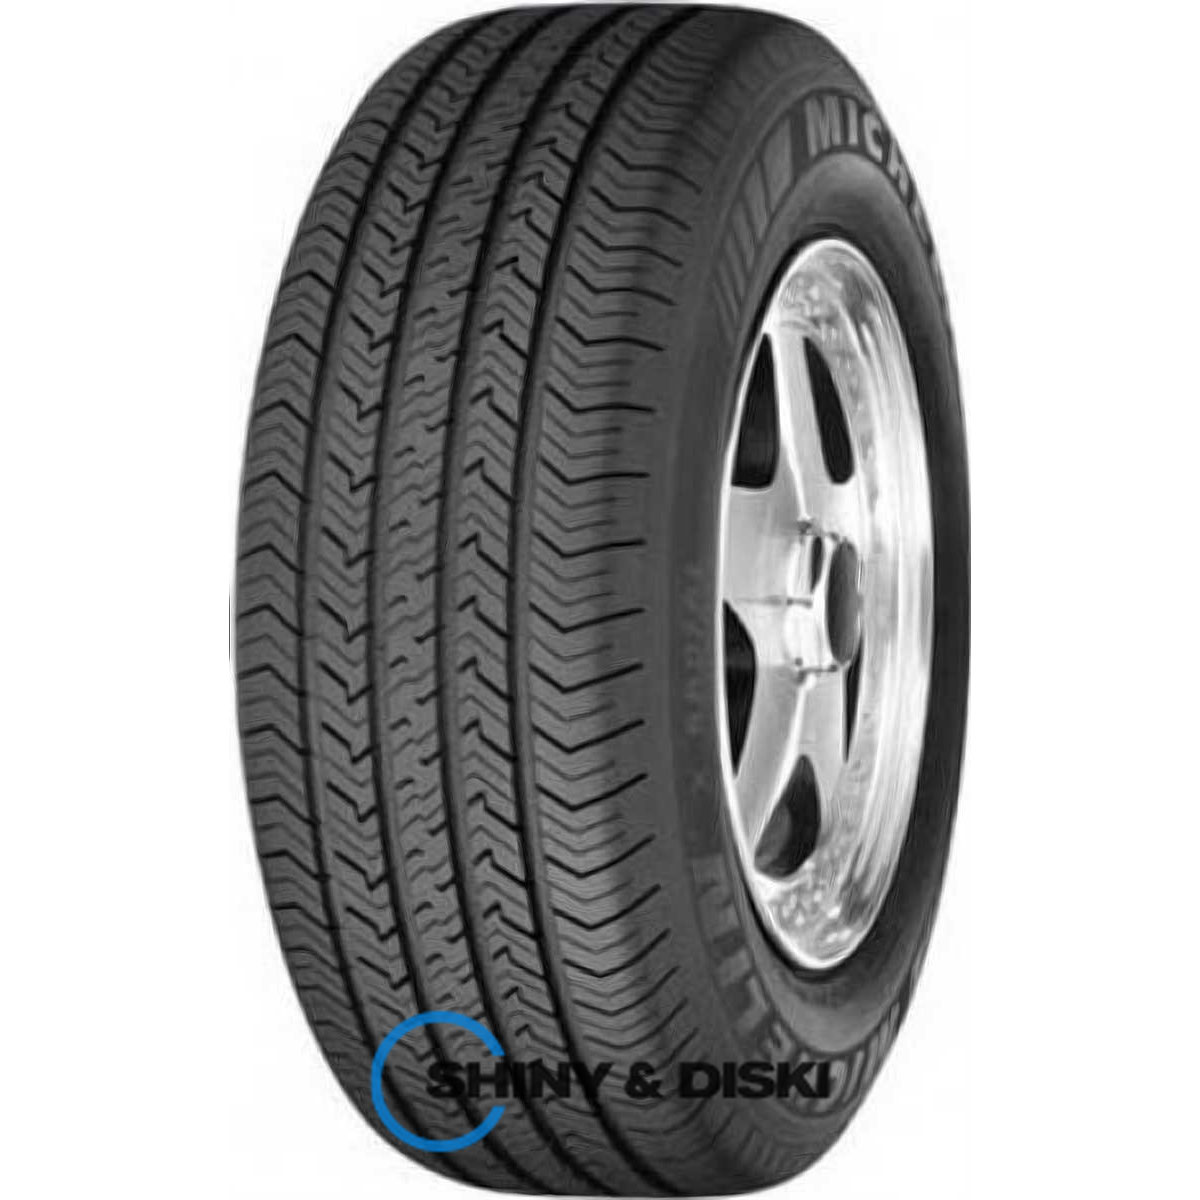 michelin x-radial dt 215/65 r16 95t